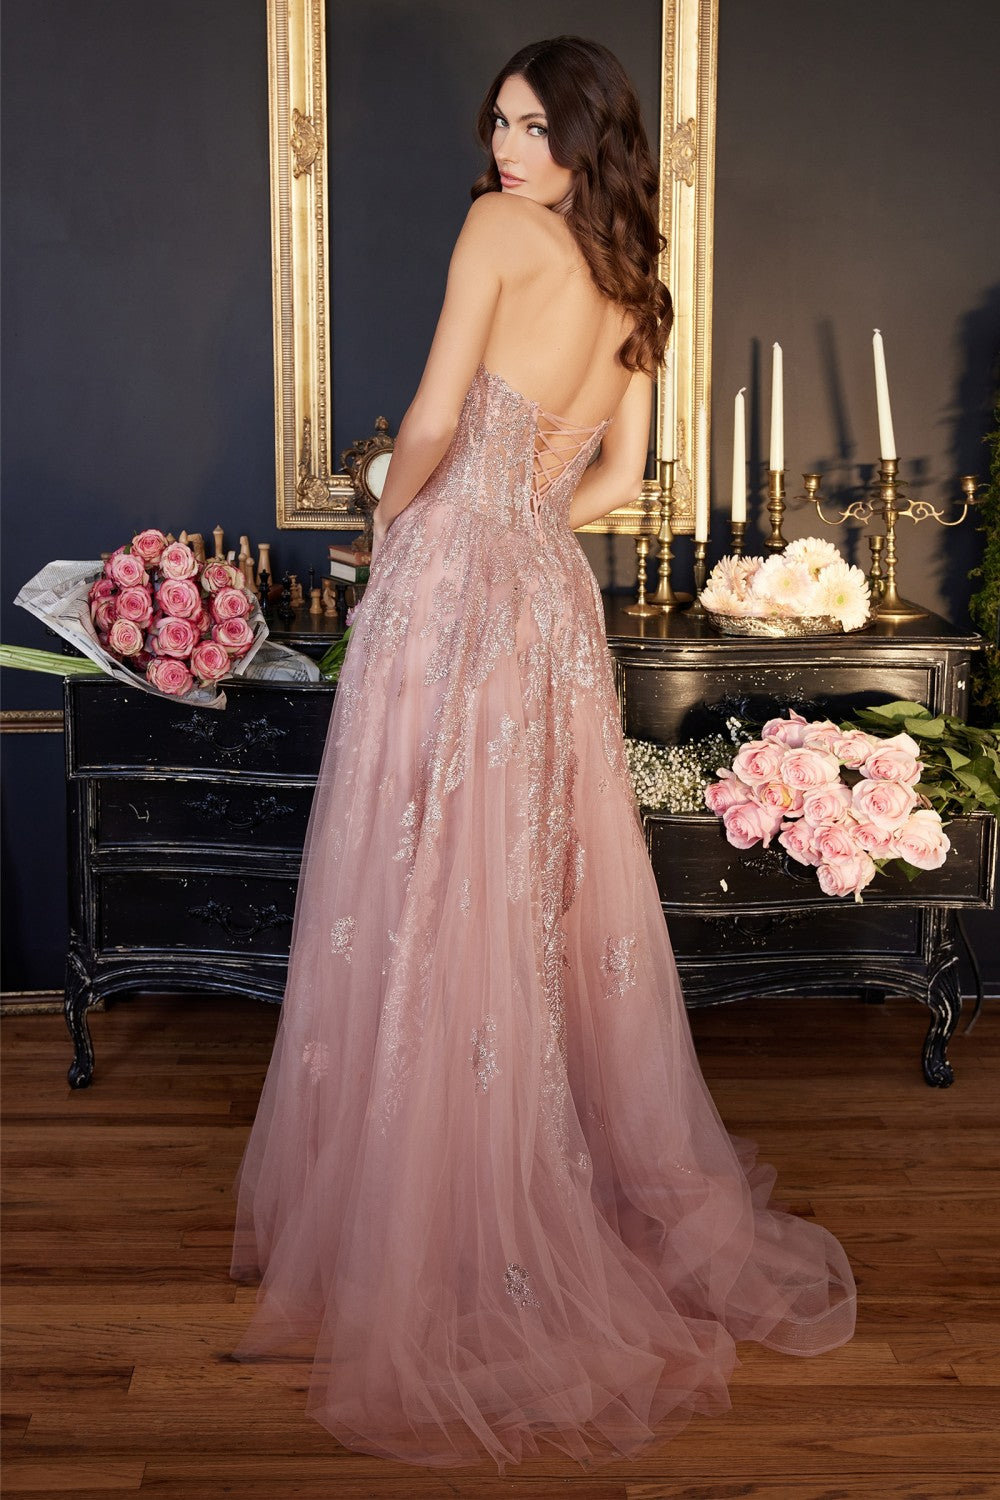 Dusty-rose Strapless Layered Tulle Ball Gown J852 - Women Evening Formal Gown - Special Occasion